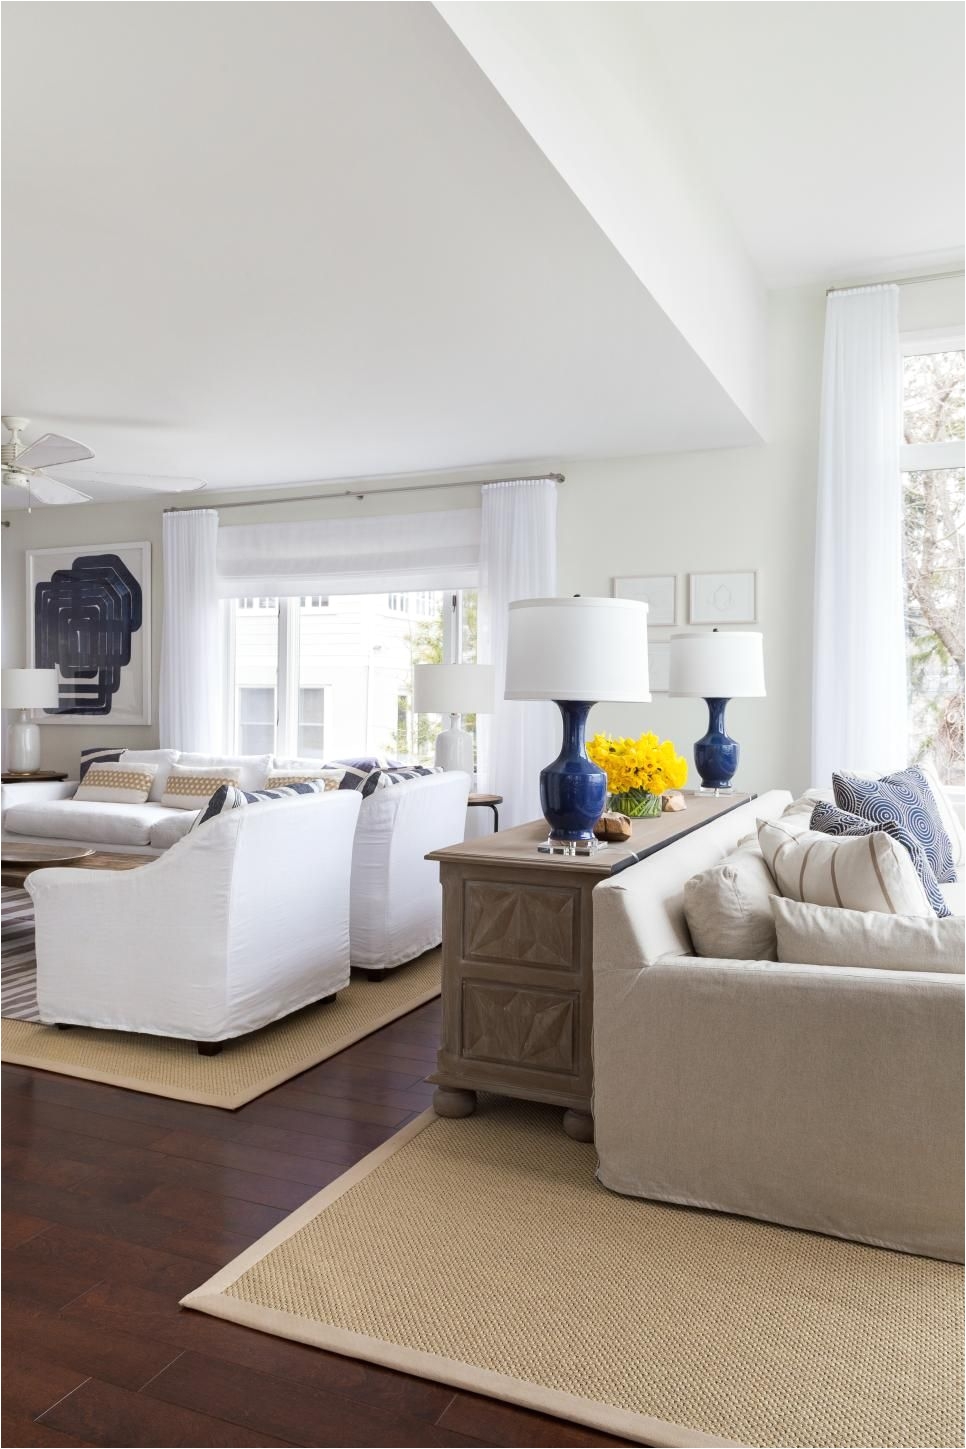 the formal living room is separated into two seating areas a reading nook and a larger conversational space sisal rugs help delineate the two sections as